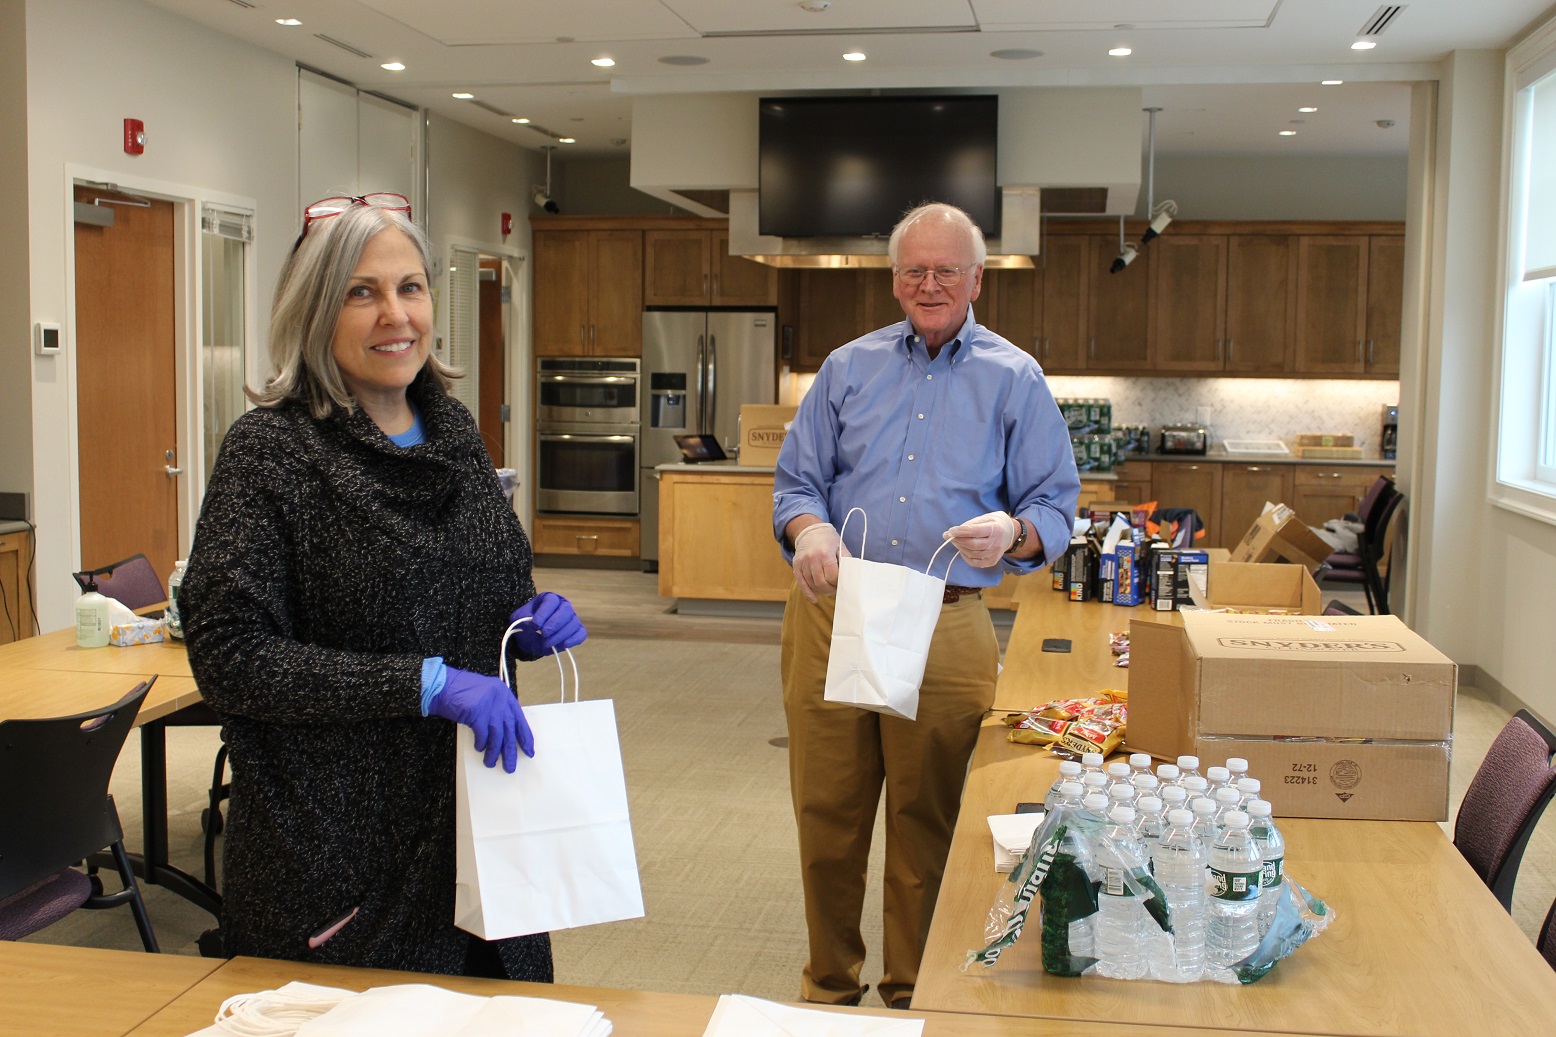 Joseph Cleary, MD, and Mary Ciarcia prepare clinician treat bags for RVNAhealth field staff.